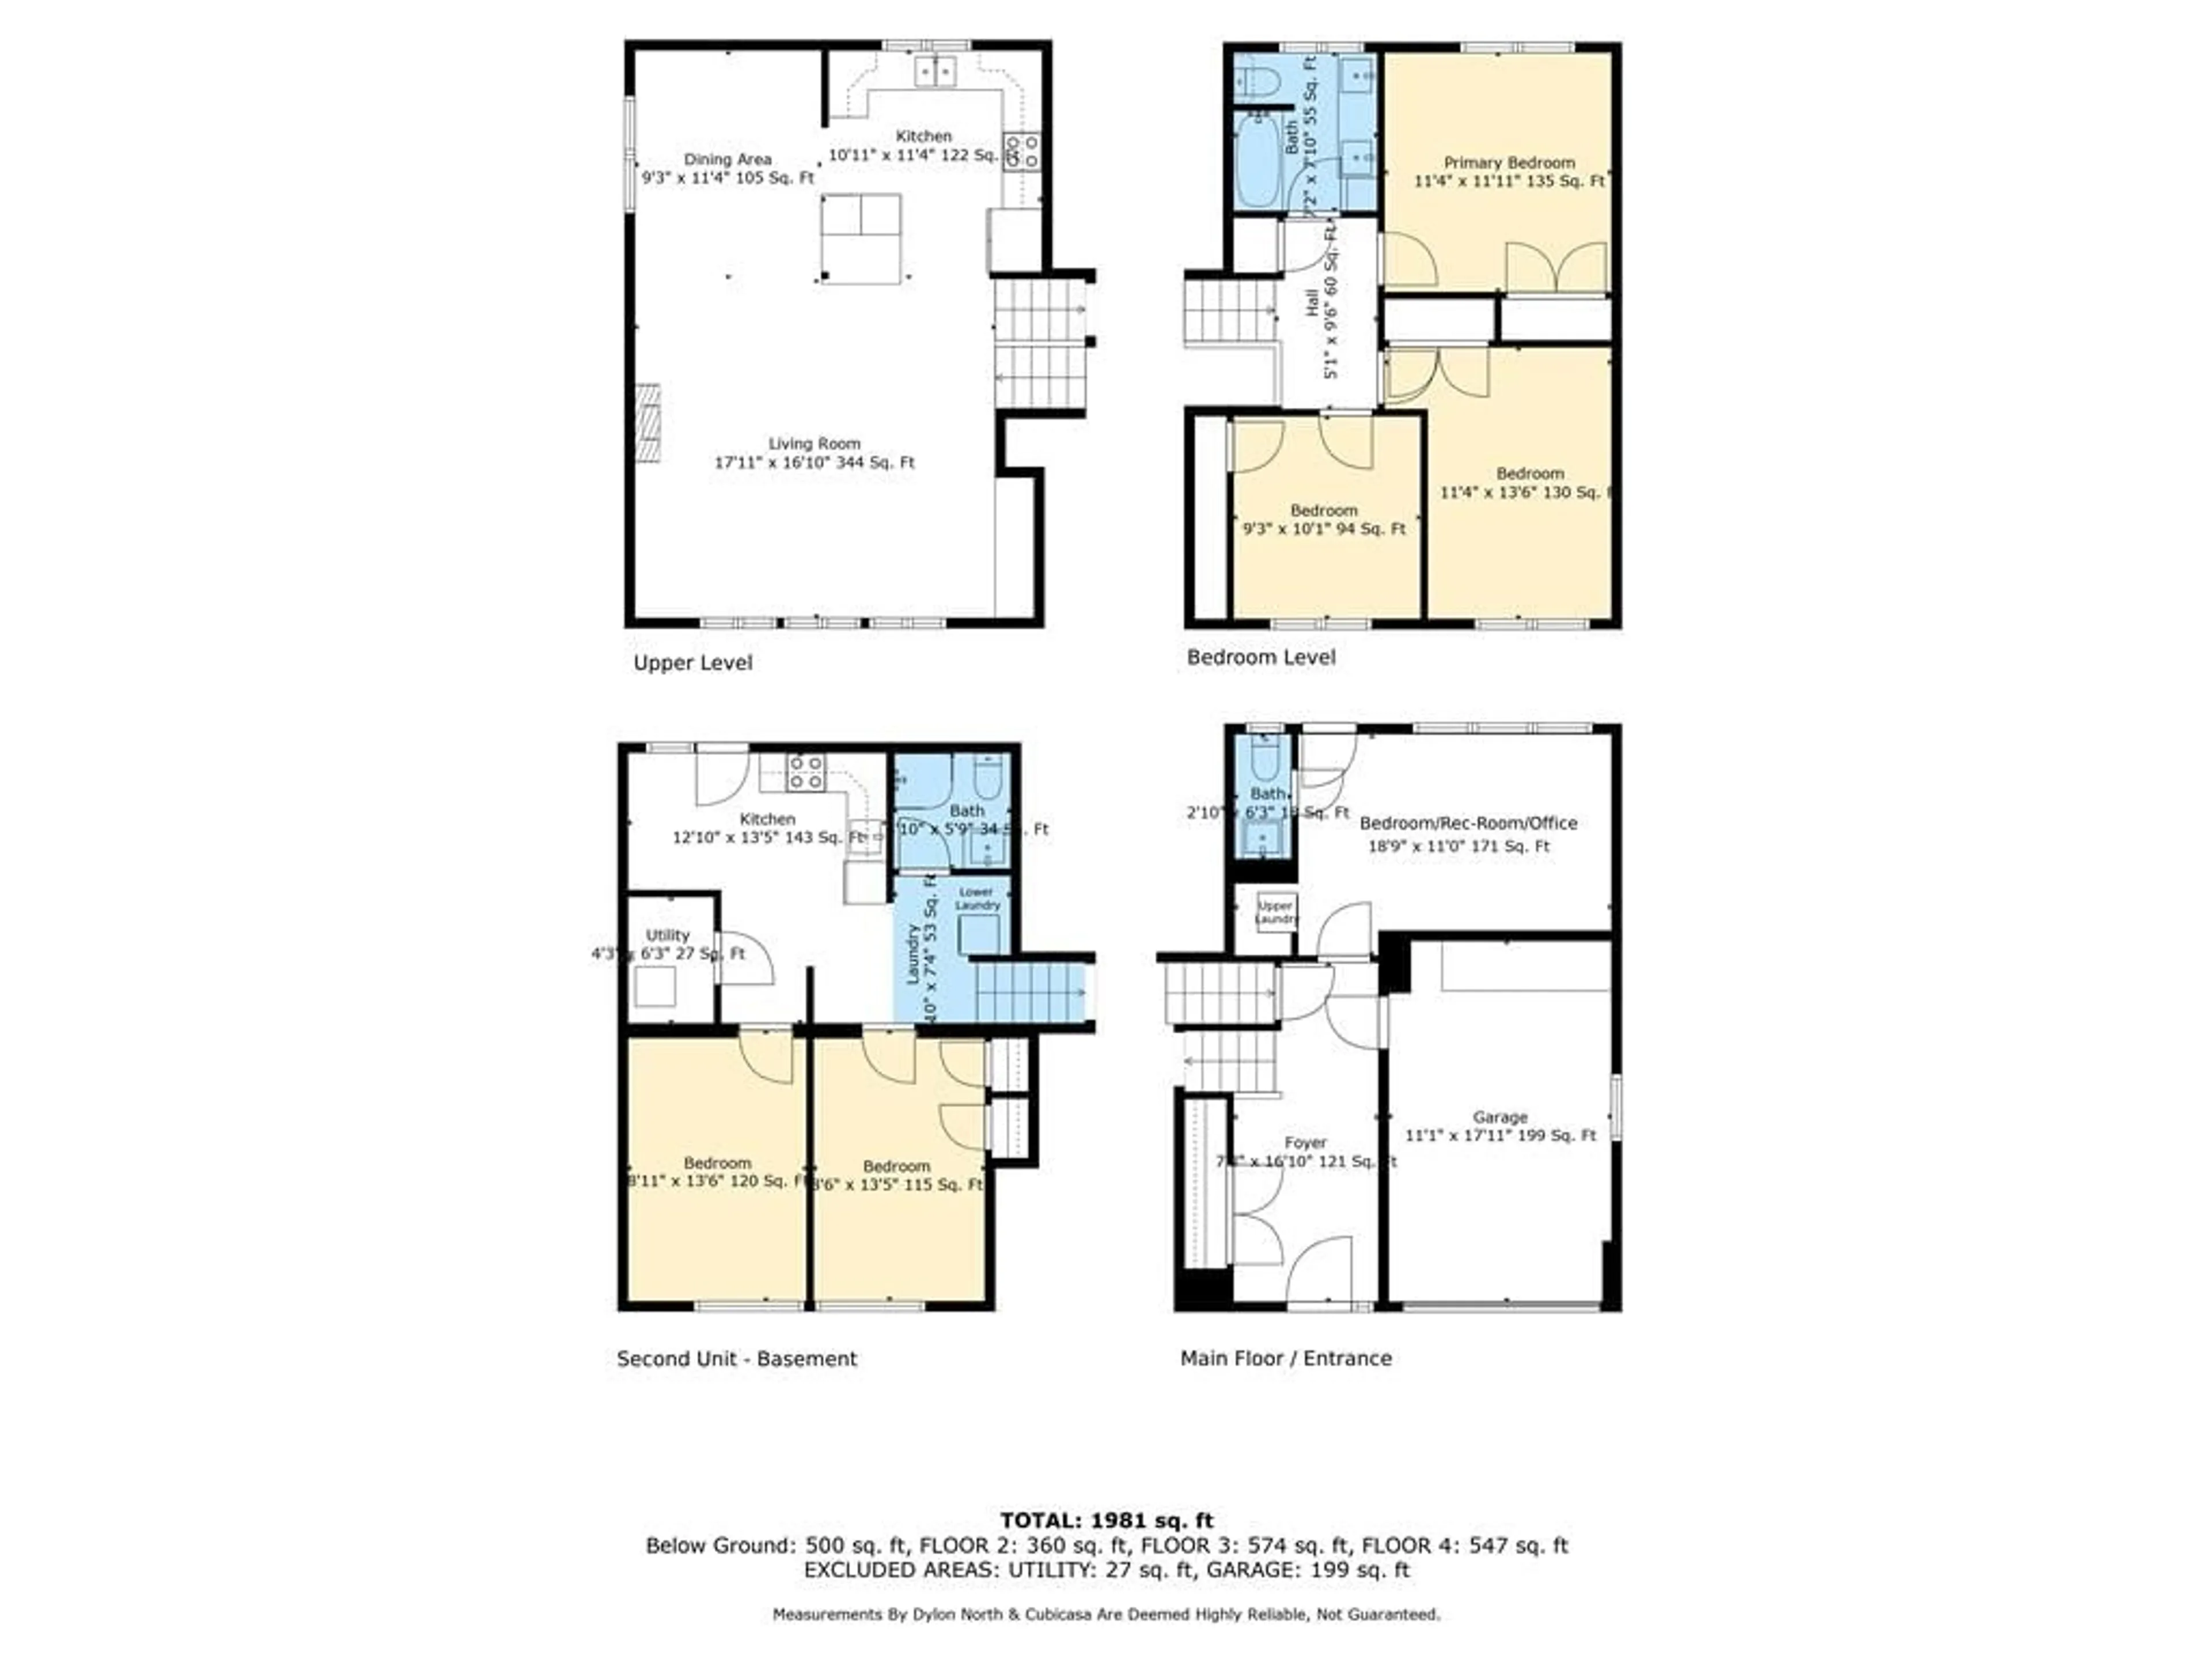 Floor plan for 857 Willowdale Ave, North York Ontario M2M 3B9